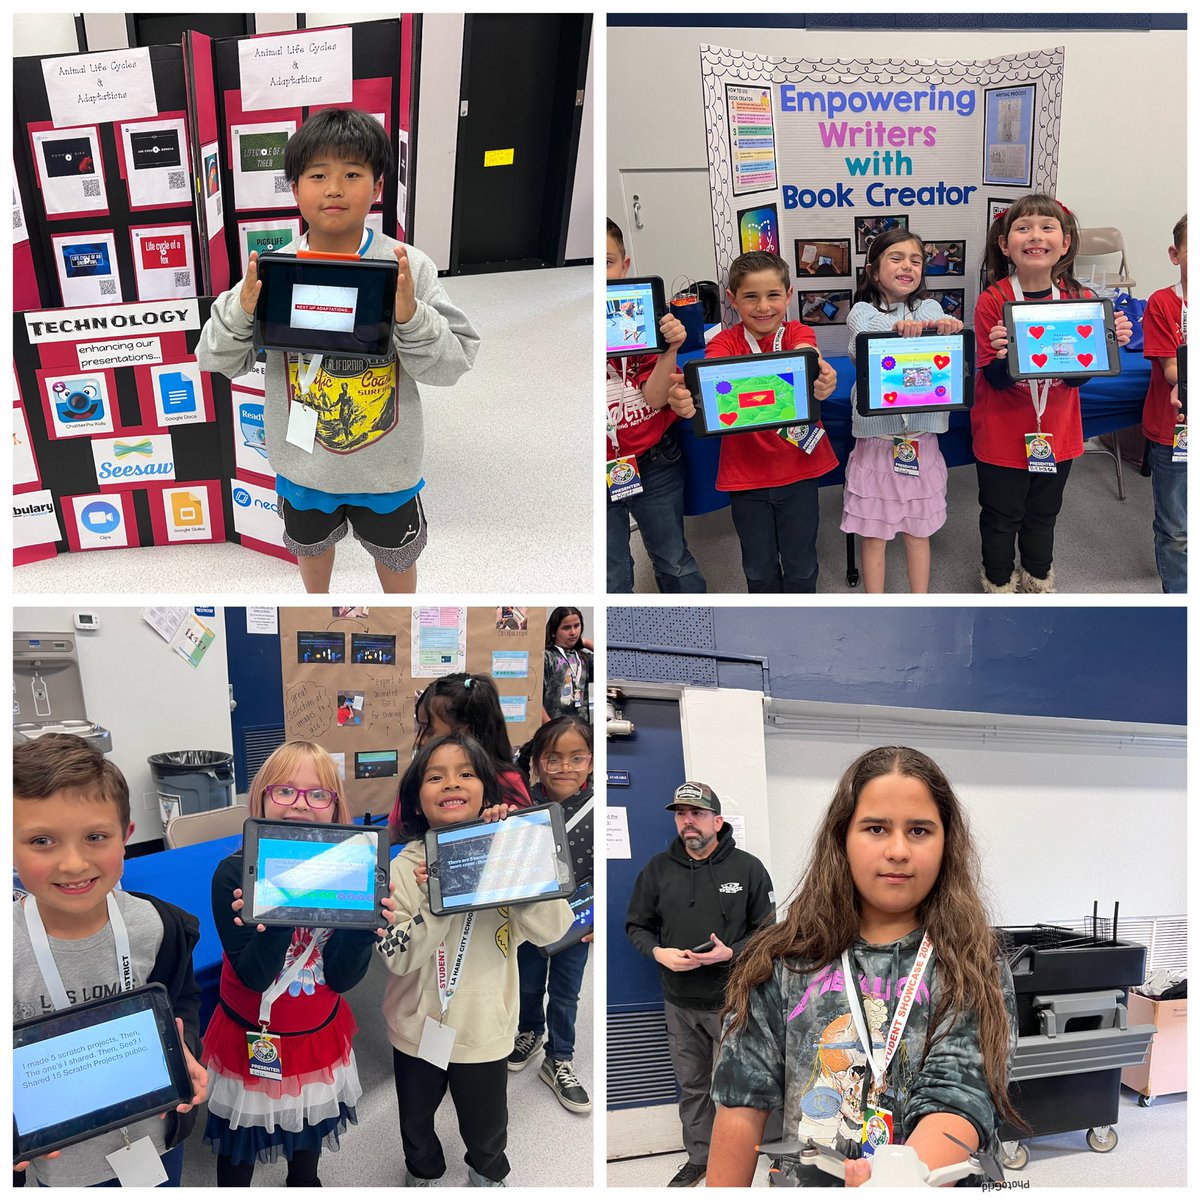 🌟 The #LHCSD Student Showcase is now live! Our talented students are unveiling incredible projects on technology, artificial intelligence, drones, and esports. Don't miss out on their amazing work. Come see the future in action! 🚀🎮🤖